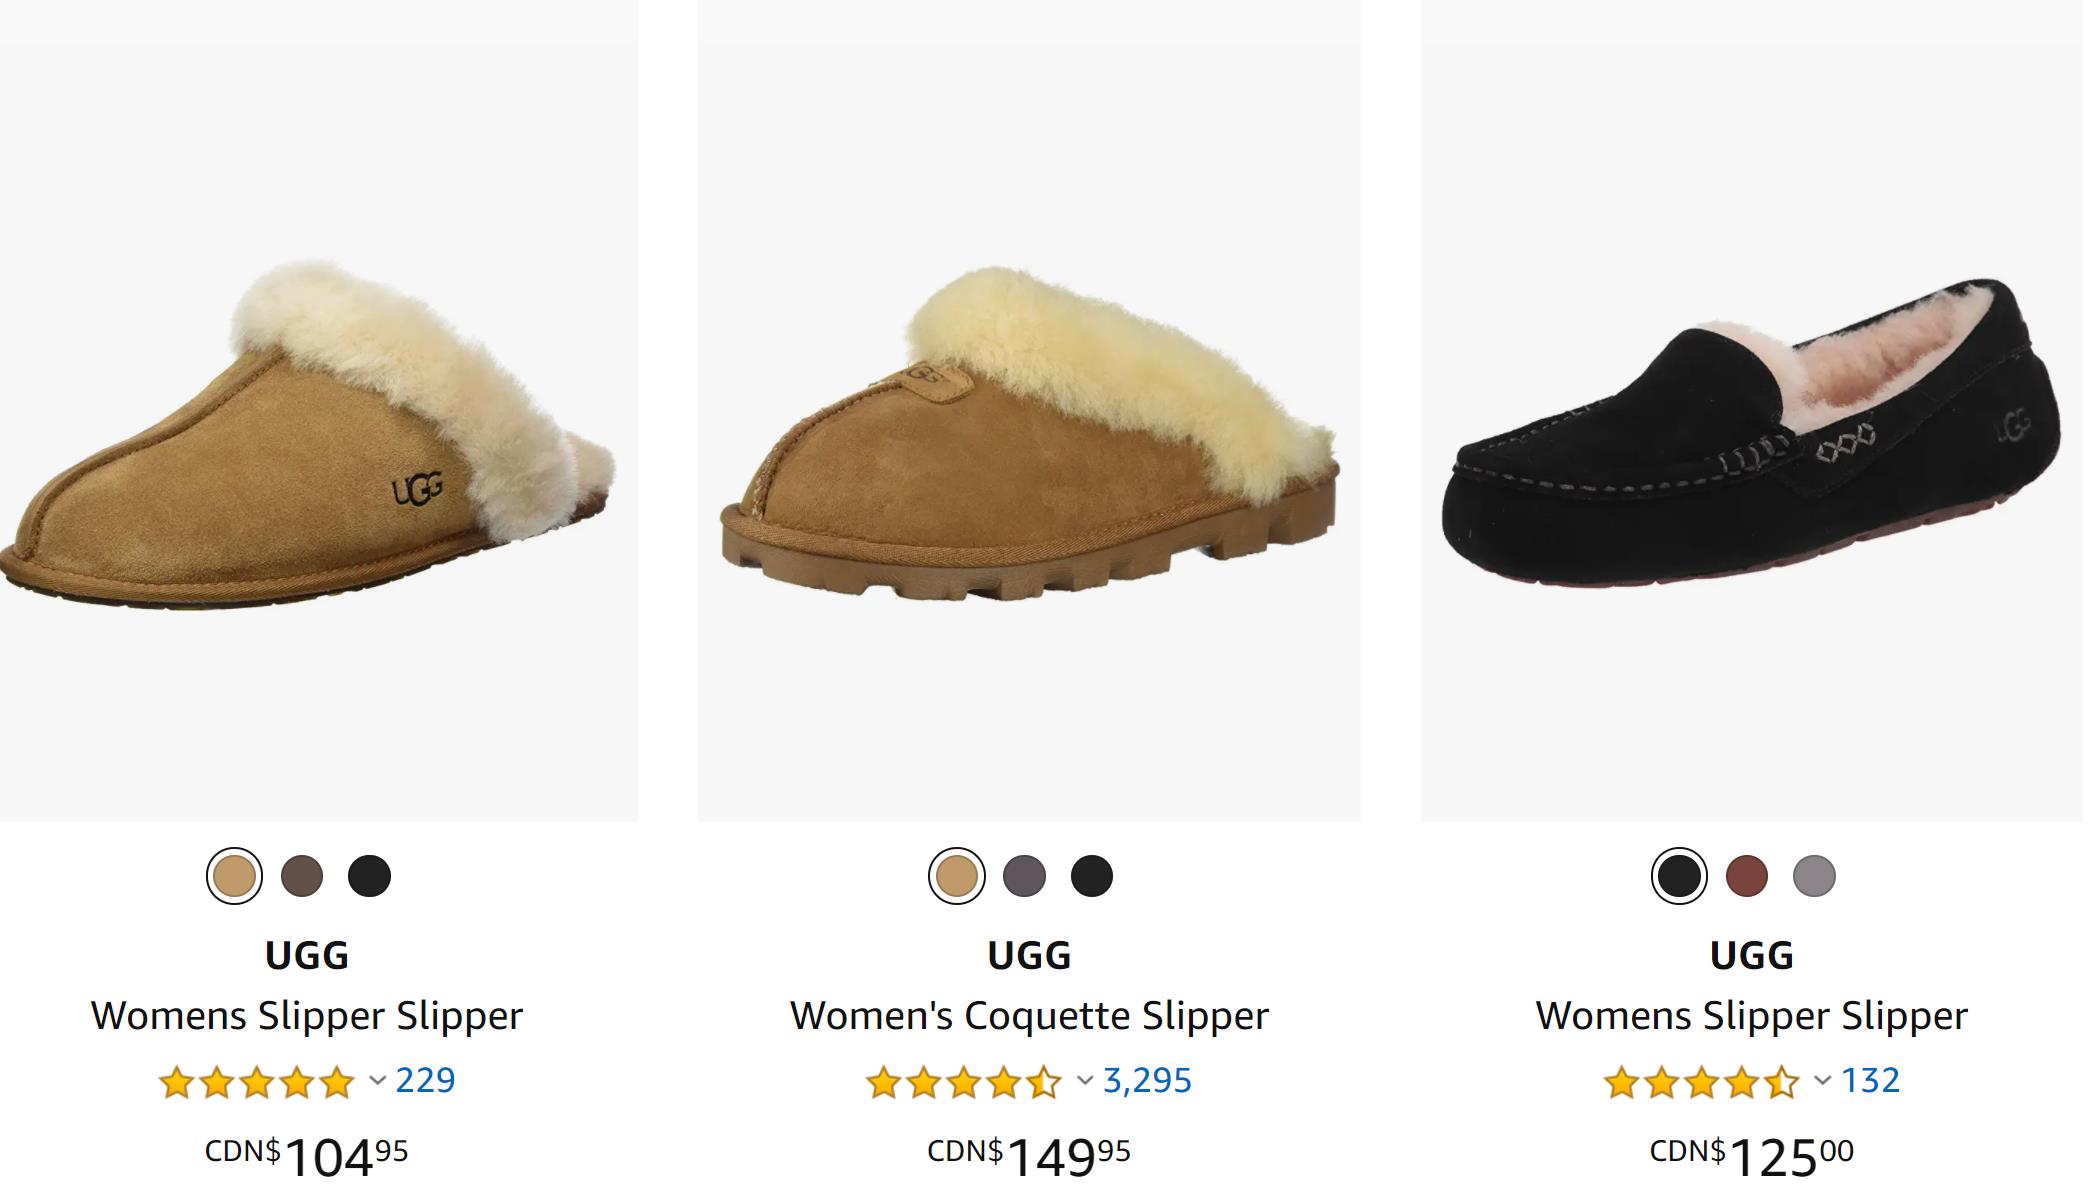 ugg-snow-boots-7-fold-warm-feet-in-winter-classic-short-122-2020-10-14